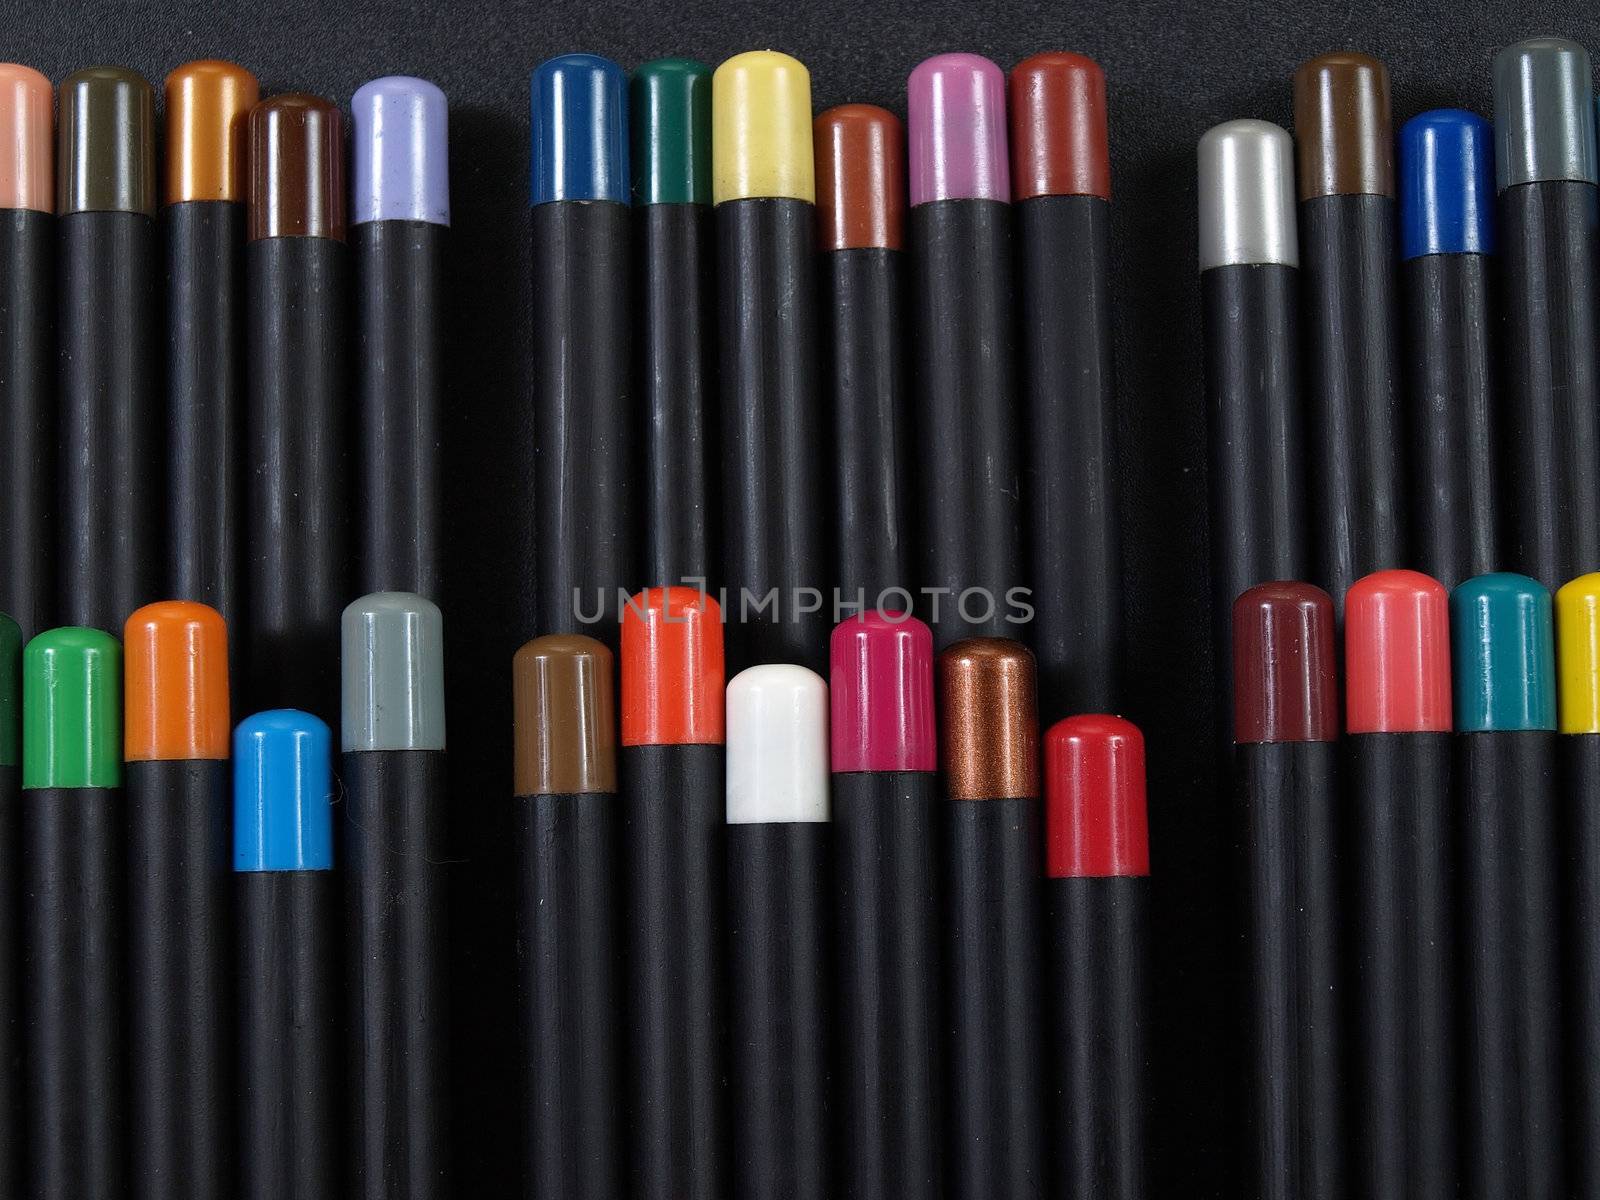 Artist pencils with identifying colored tops arranged against a black background.